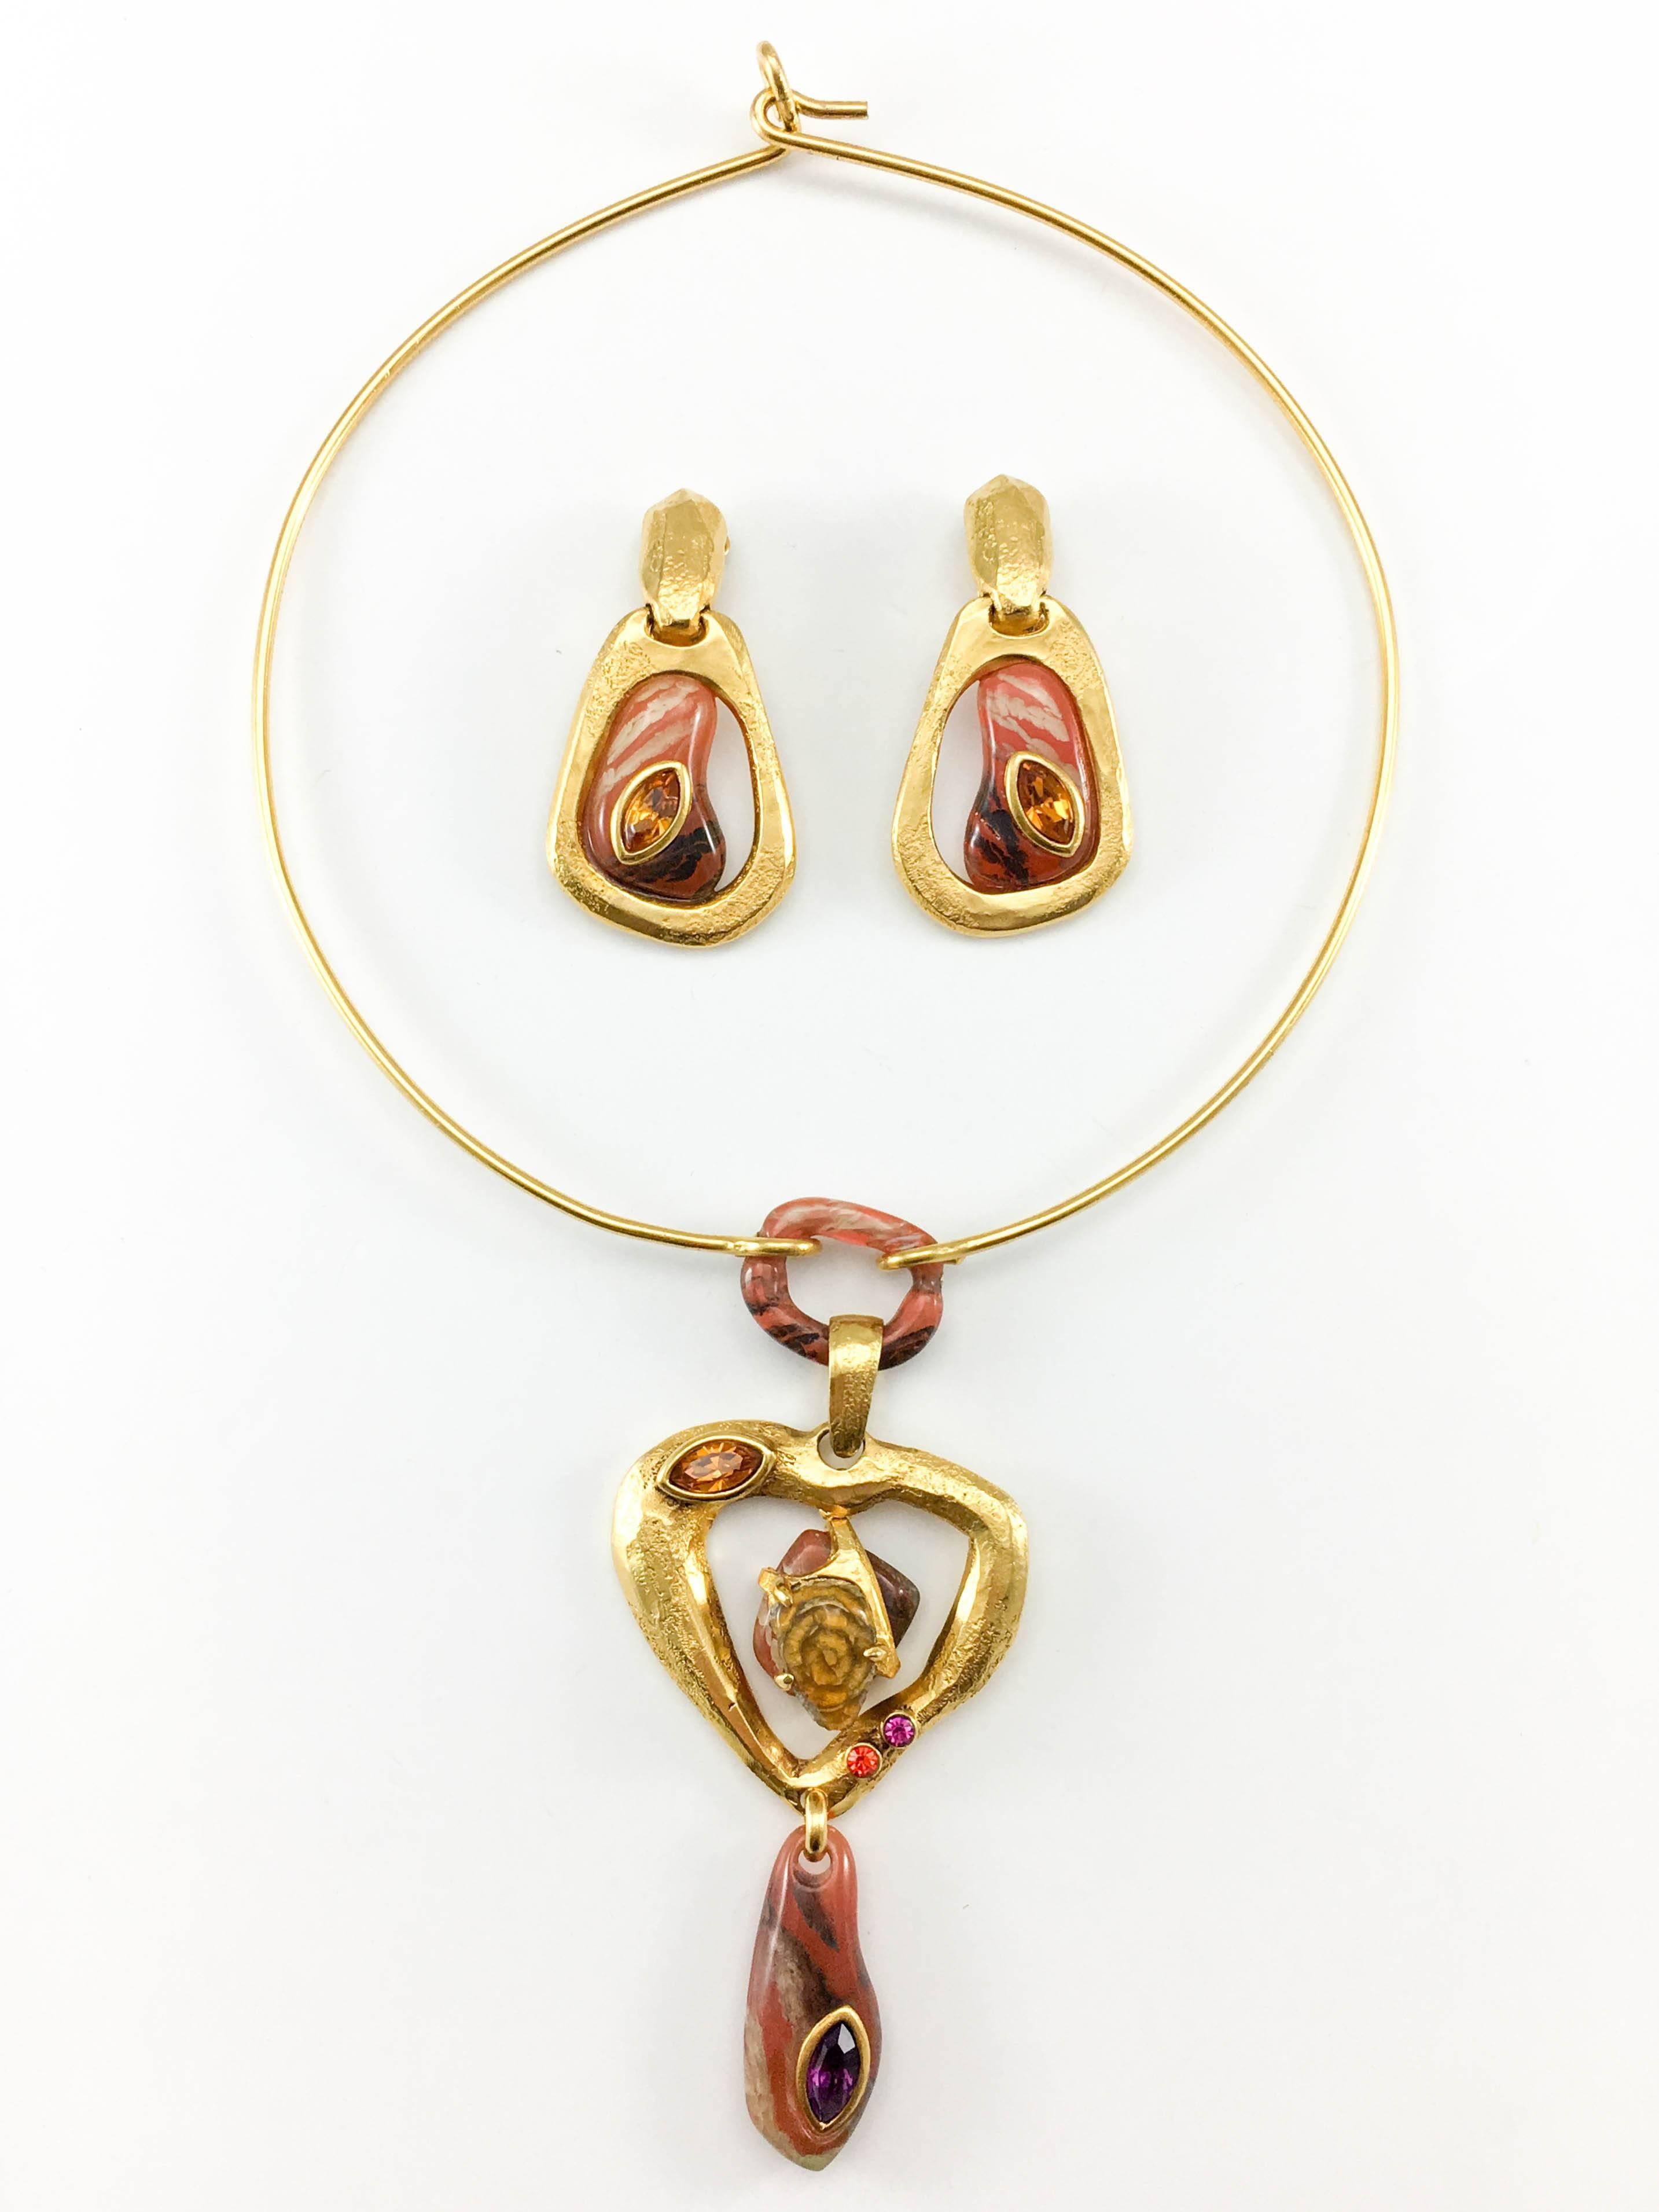 Vintage Lacroix Gold-Plated Modernist Necklace and Earring Set. This amazing set by Christian Lacroix was crafted in the 1980’s. Comprising of a torque necklace and a pair of earrings, it features a modernist design in gold-plated metal, faux agate